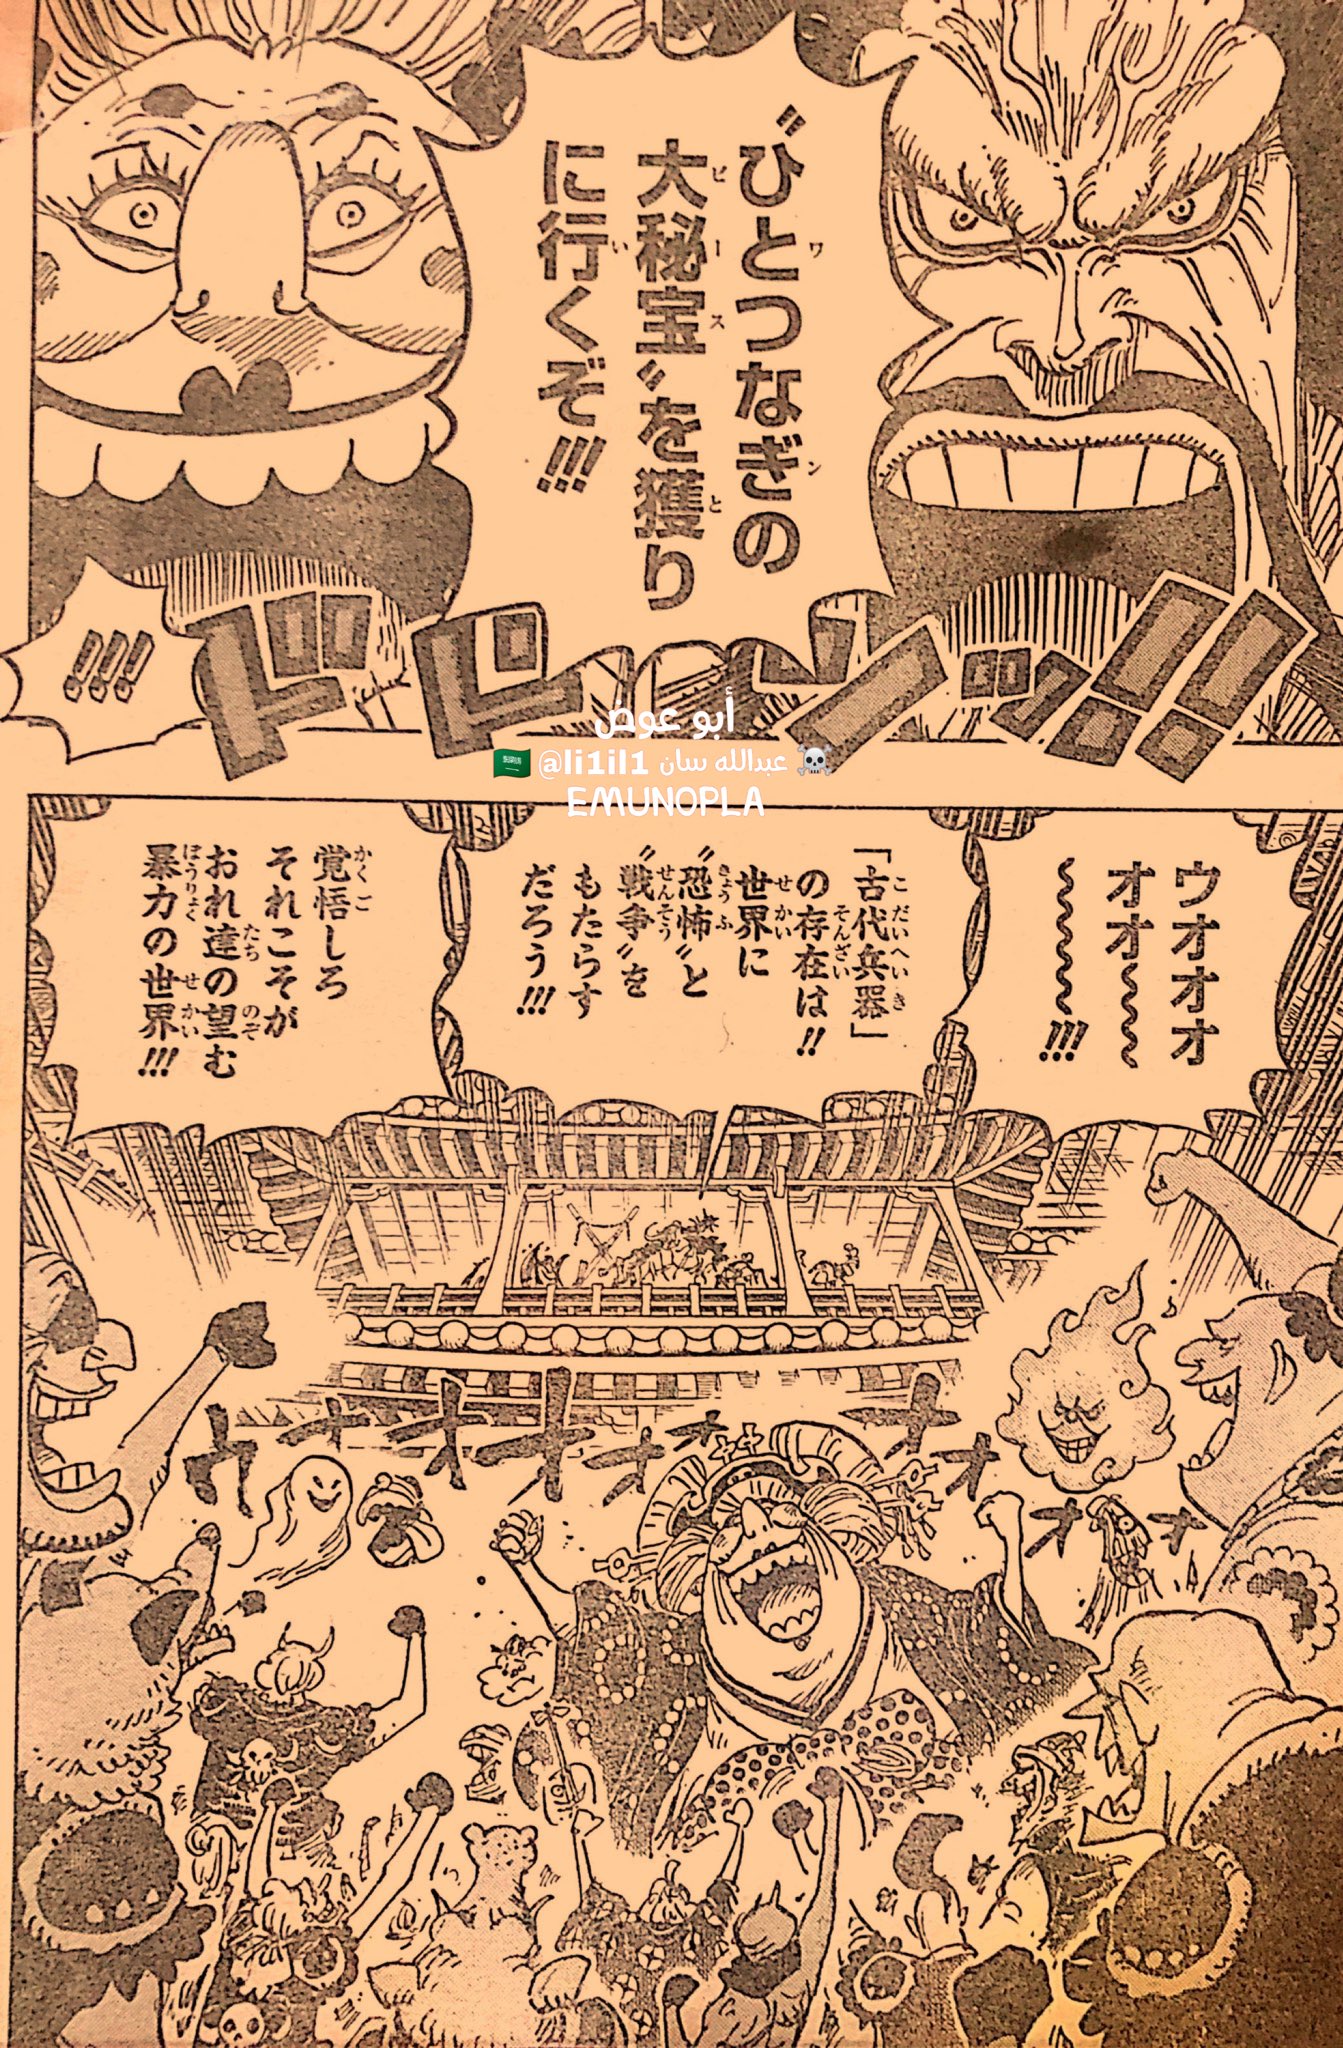 Spoiler One Piece Chapter 985 Spoilers Discussion Page 172 Worstgen